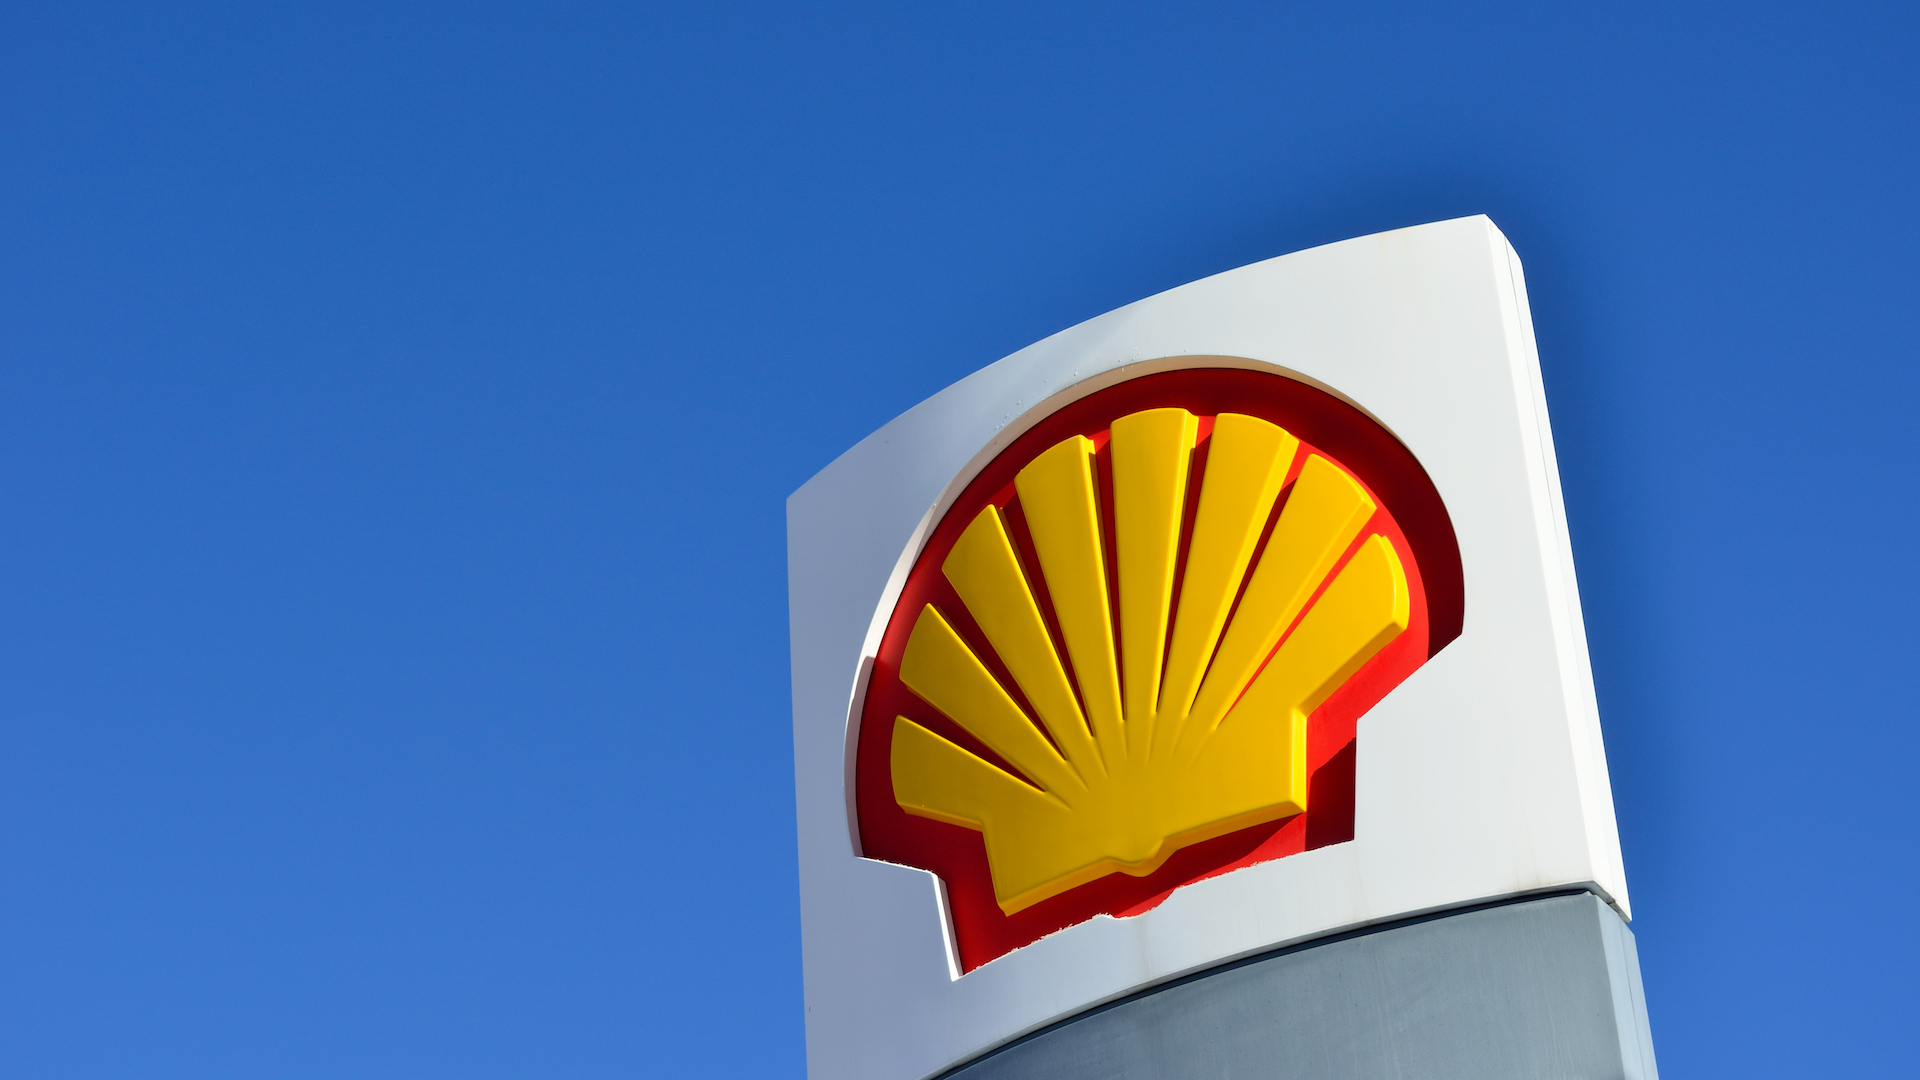 The red and yellow shell logo sits on top of a pricing tower against a blue sky